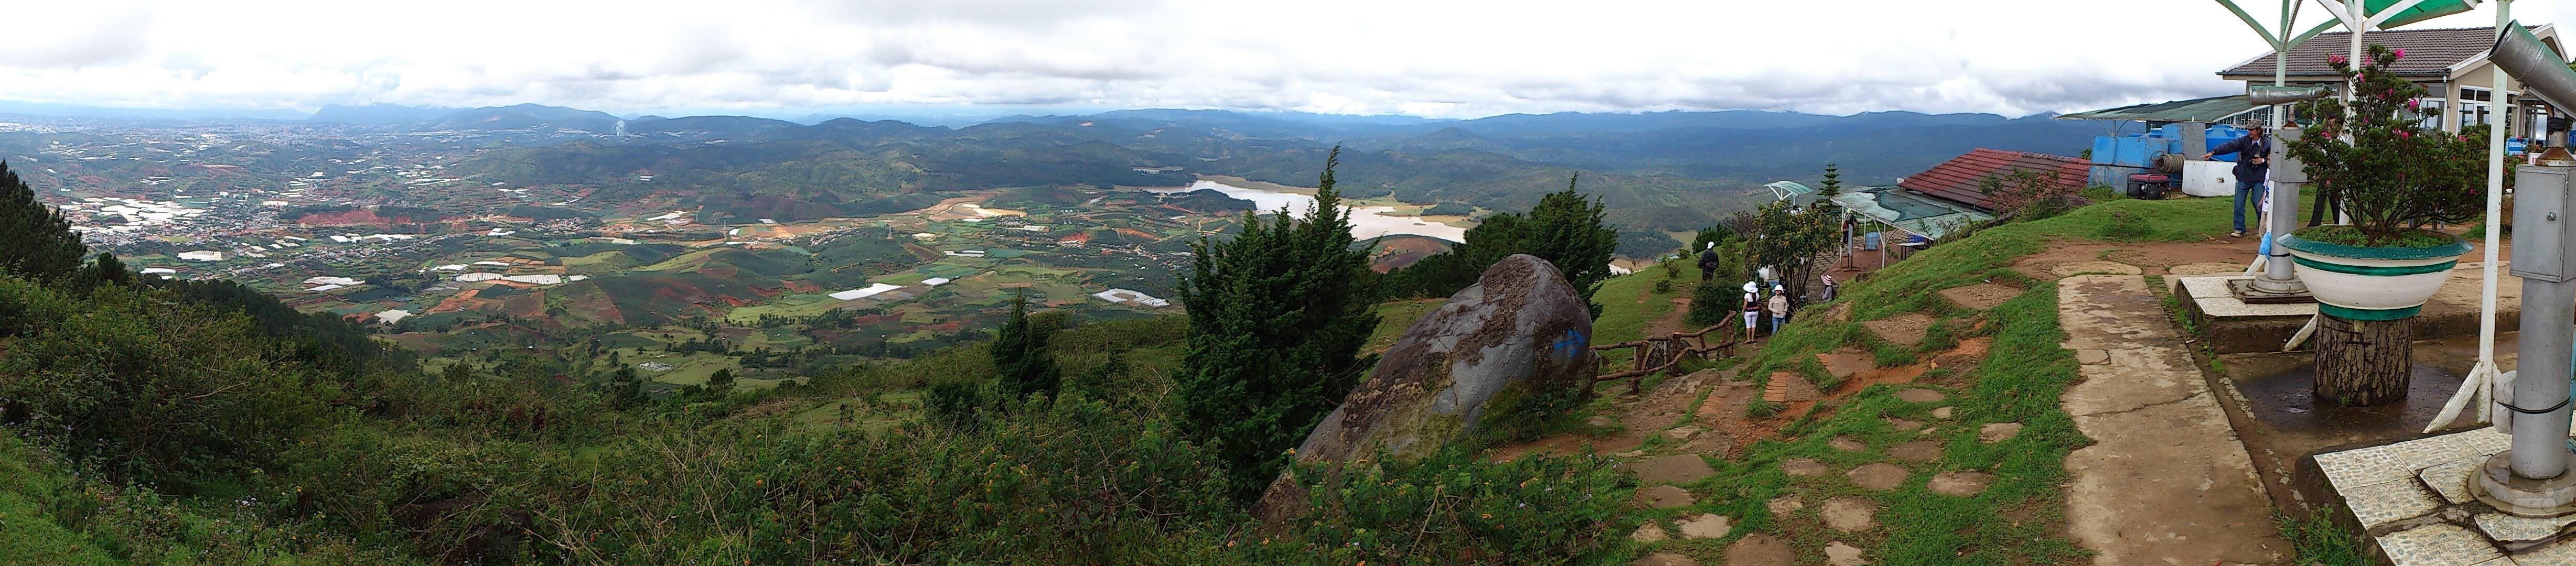 15. maxmedia - Sony Ericsson Xperia neoMountain peaks Langbiang, Dalat City, Vietnam - Cool images, taken with your cell phone #22